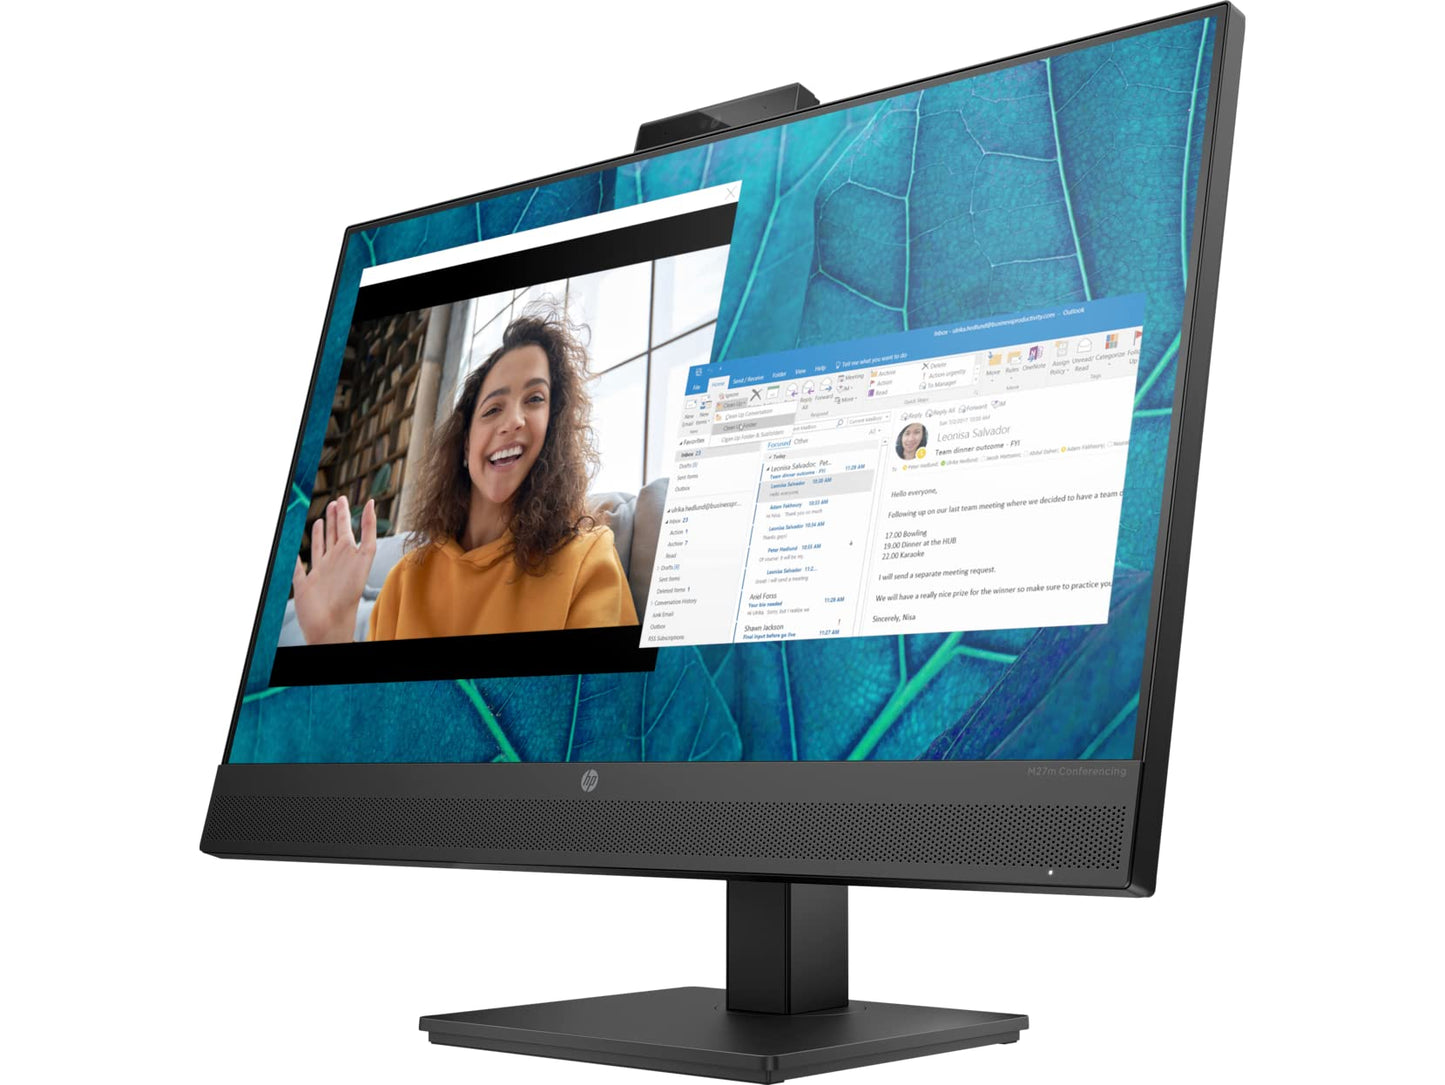 HP M27m Conferencing Monitor 68.58 cm (27") Anti-glare FHD (1920 x 1080), IPS, 300 nits, Height Adjustable, Webcam 5MP; HP Eye Ease/Mic Speakers 2 x 2 W On-screen controls, 3 Years Warranty.